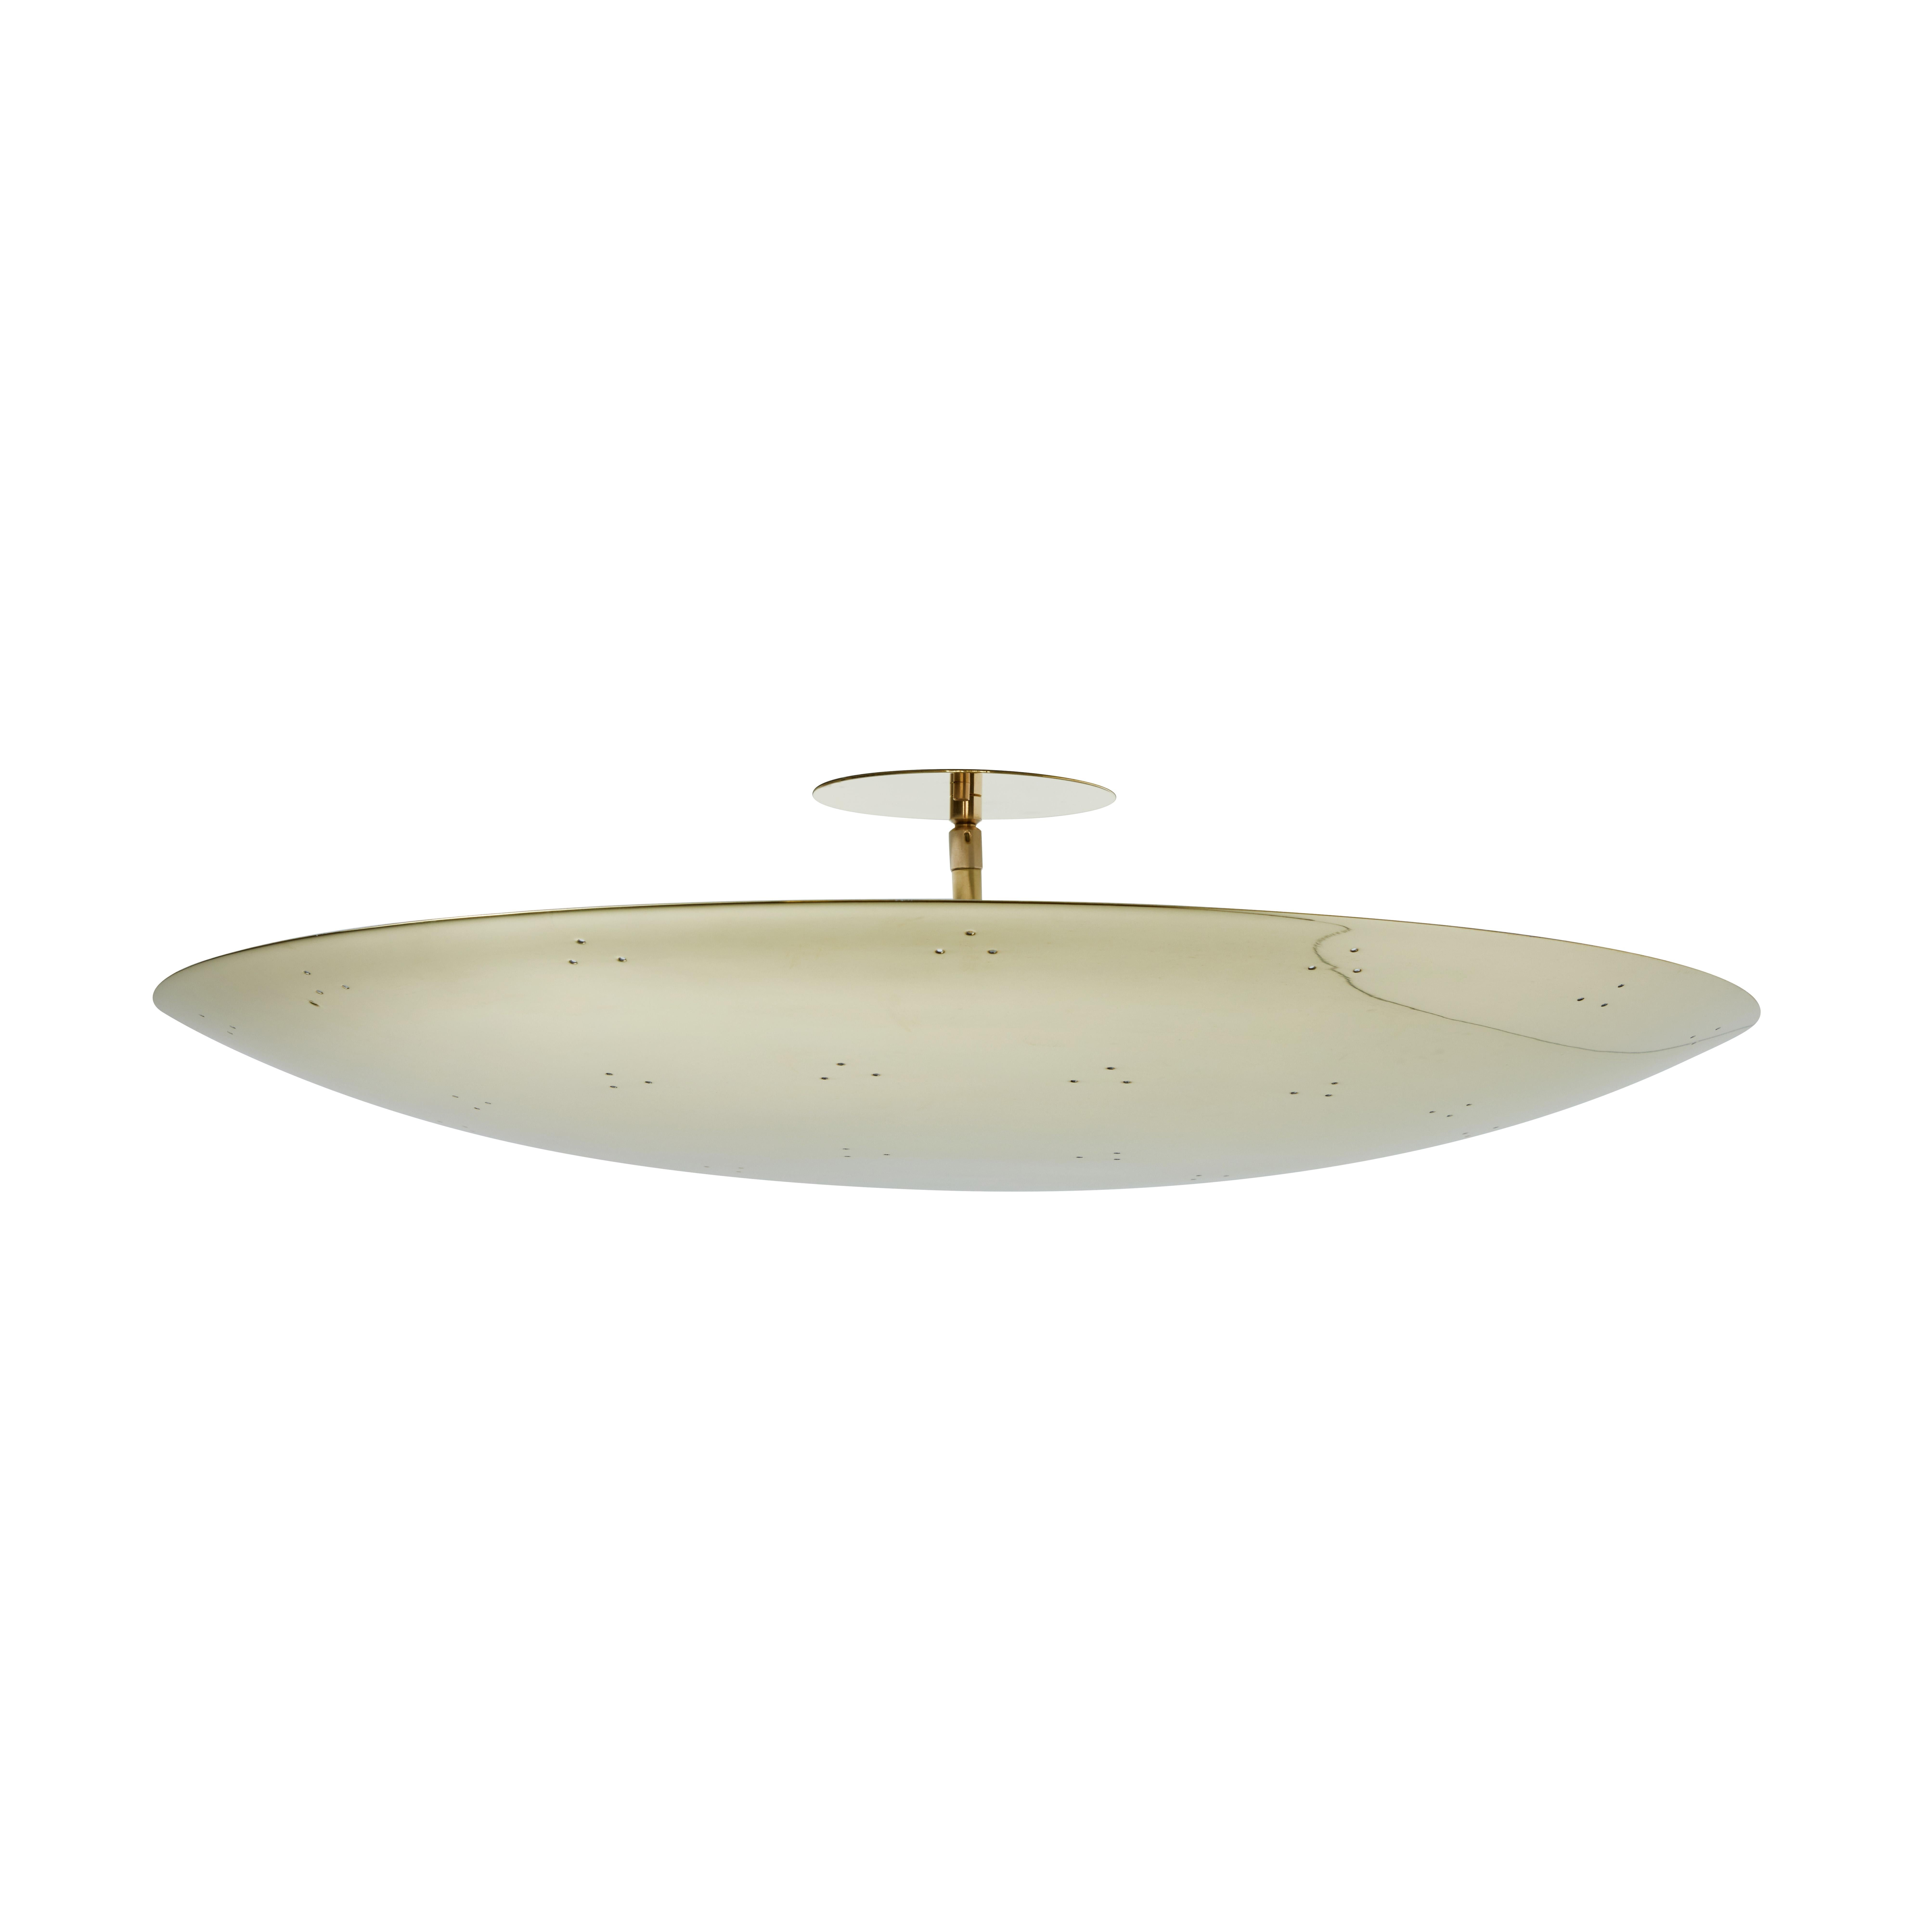 Two Enlighten 'Rey' Perforated Patinated Brass Dome Ceiling Lamp For Sale 7